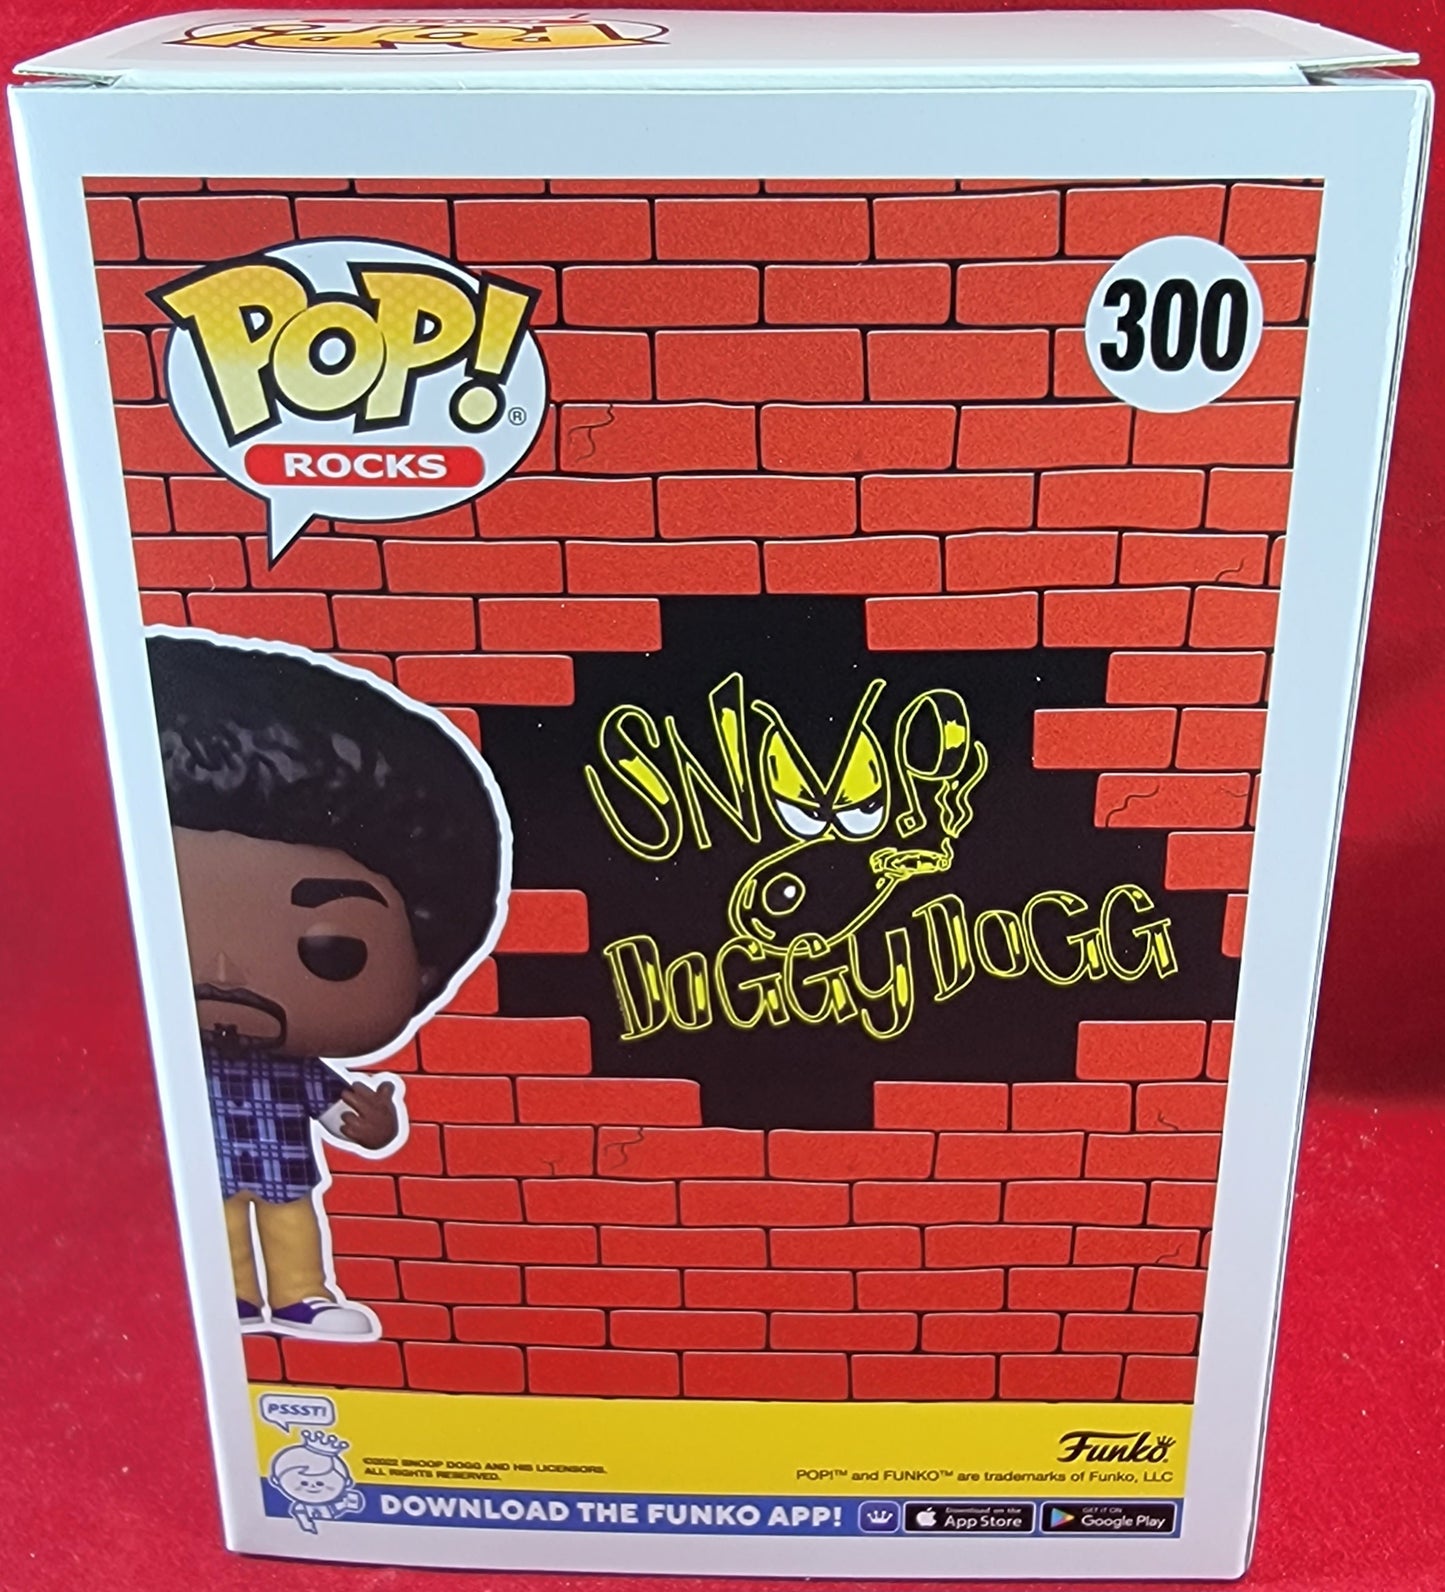 Snoop Dogg funko # 300 (nib)
brand new snoop rapper funko pop. snoop dog is in all afro glory in khakis with blue plad. pop is in near perfect condition and will be shipped in a compatible pop protector.